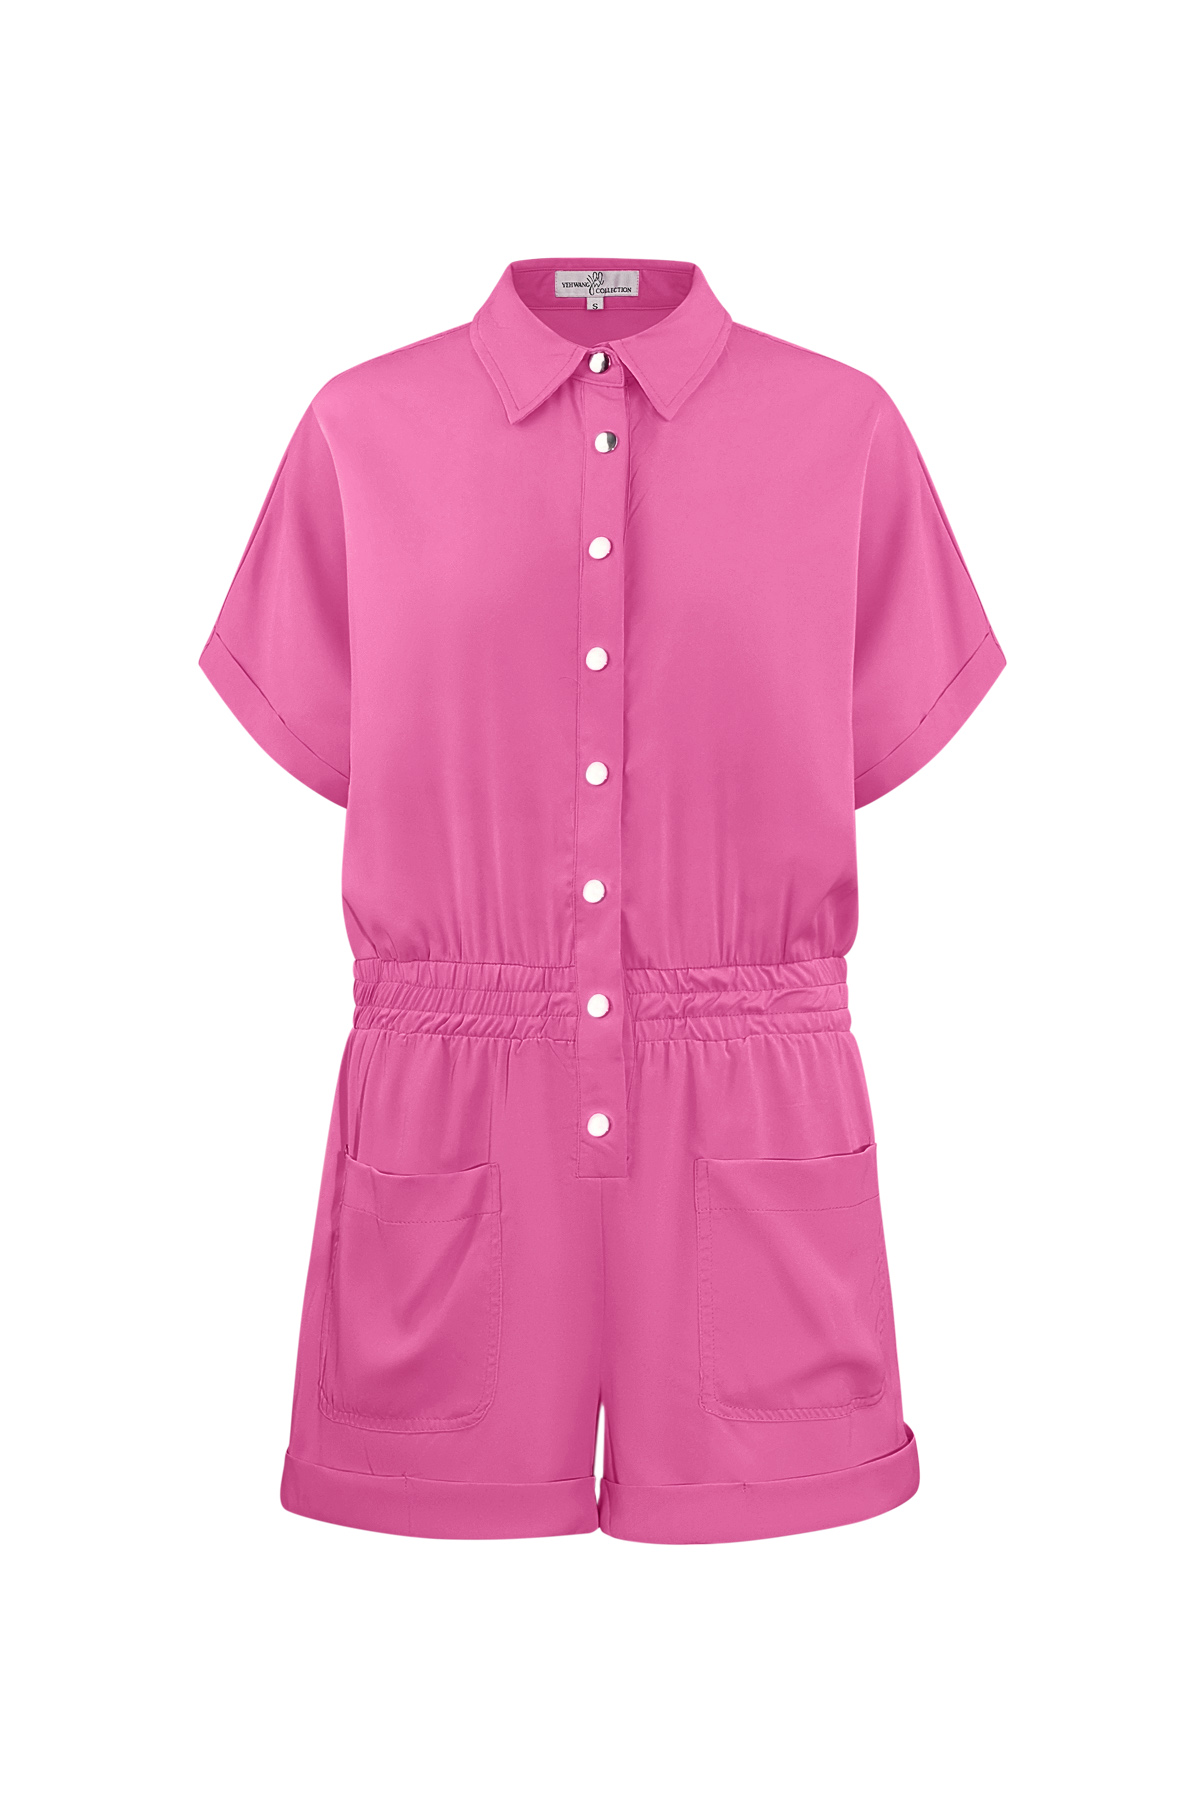 Farbenfroher Playsuit - fuchsia